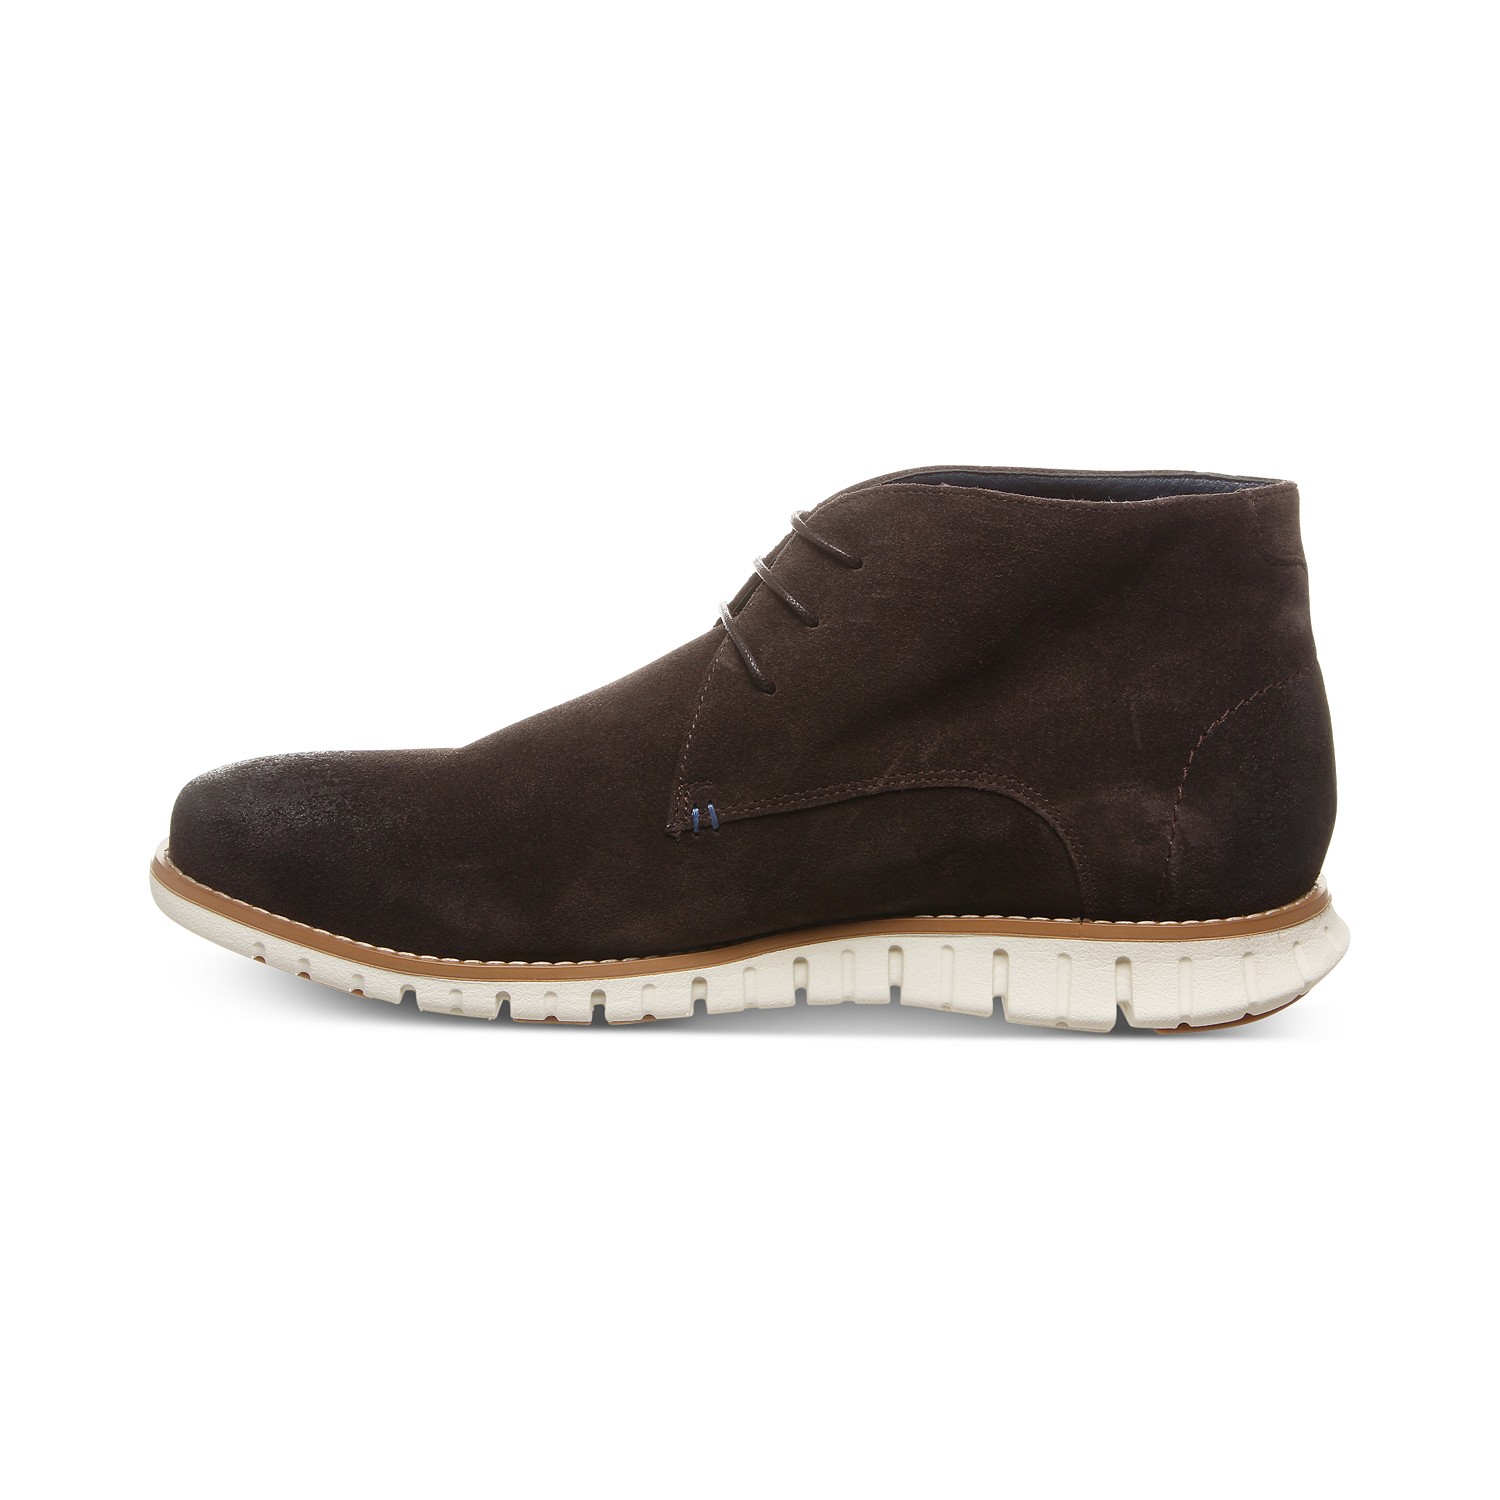 woocommerce-673321-2209615.cloudwaysapps.com-bearpaw-mens-brown-suede-gabe-chukka-boots